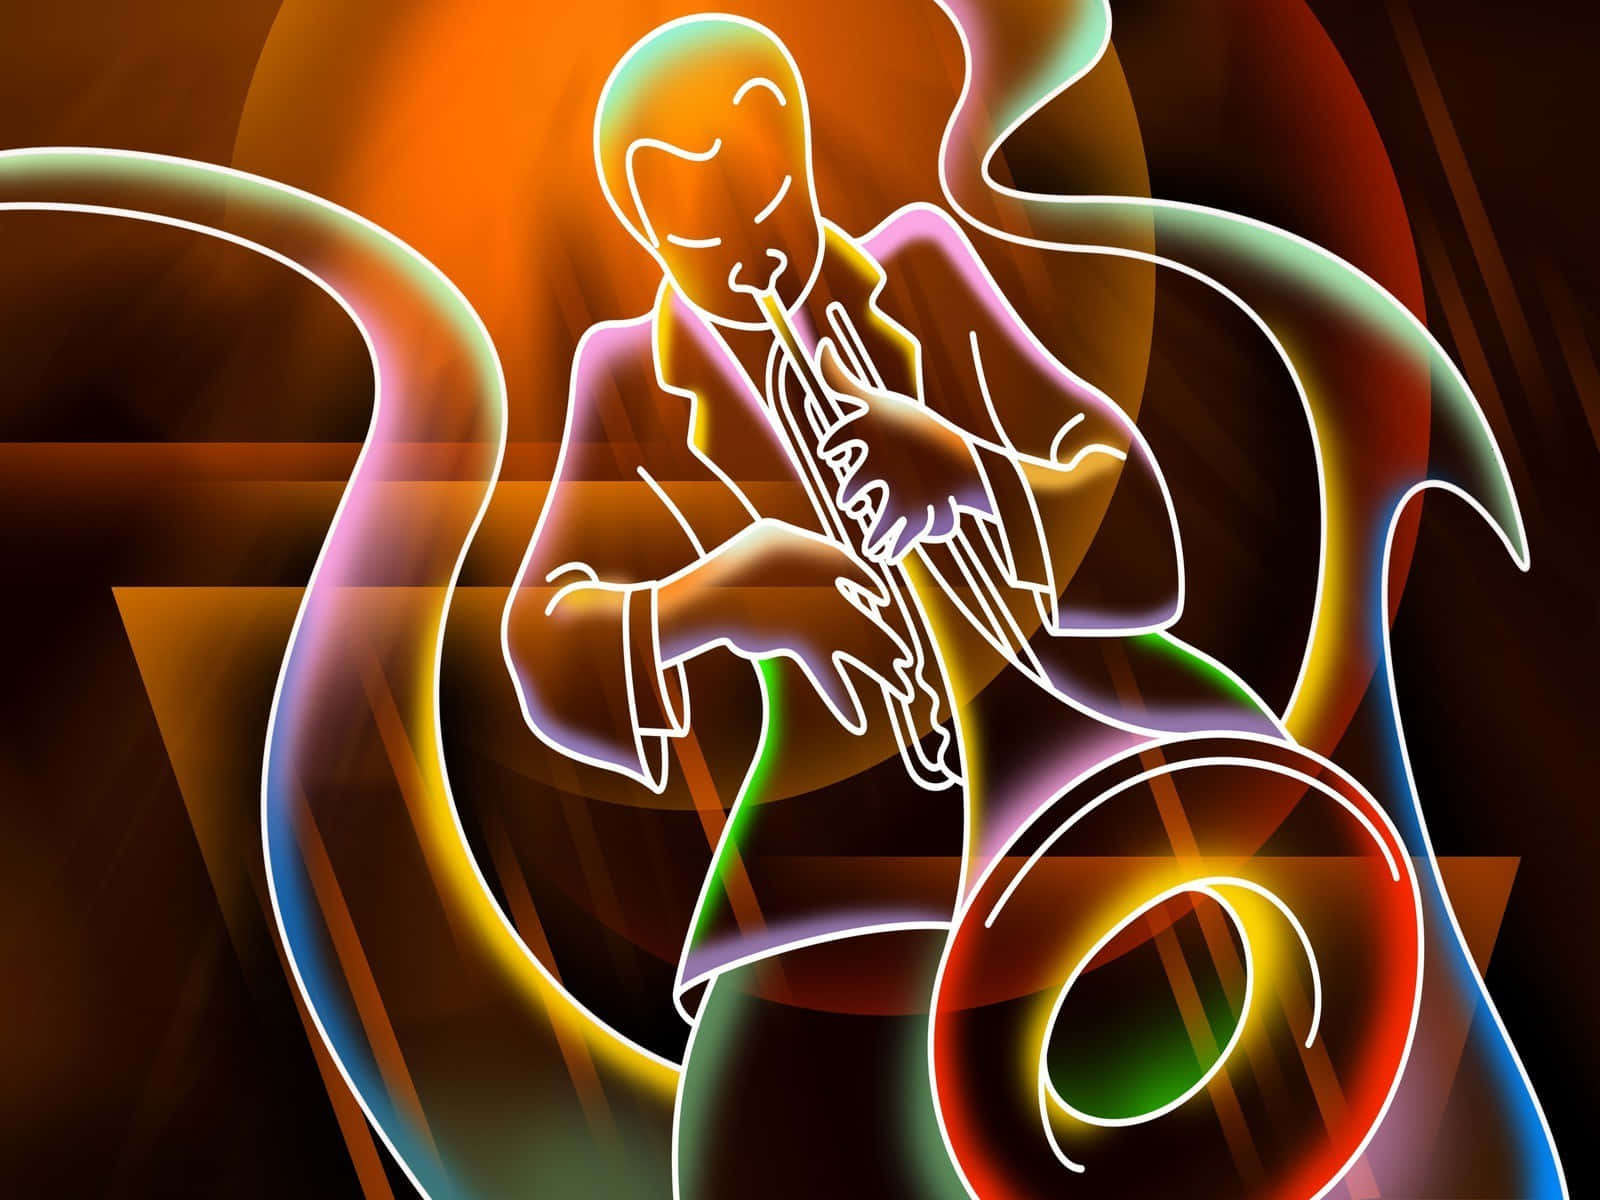 A Colorful Image Of A Saxophone Player